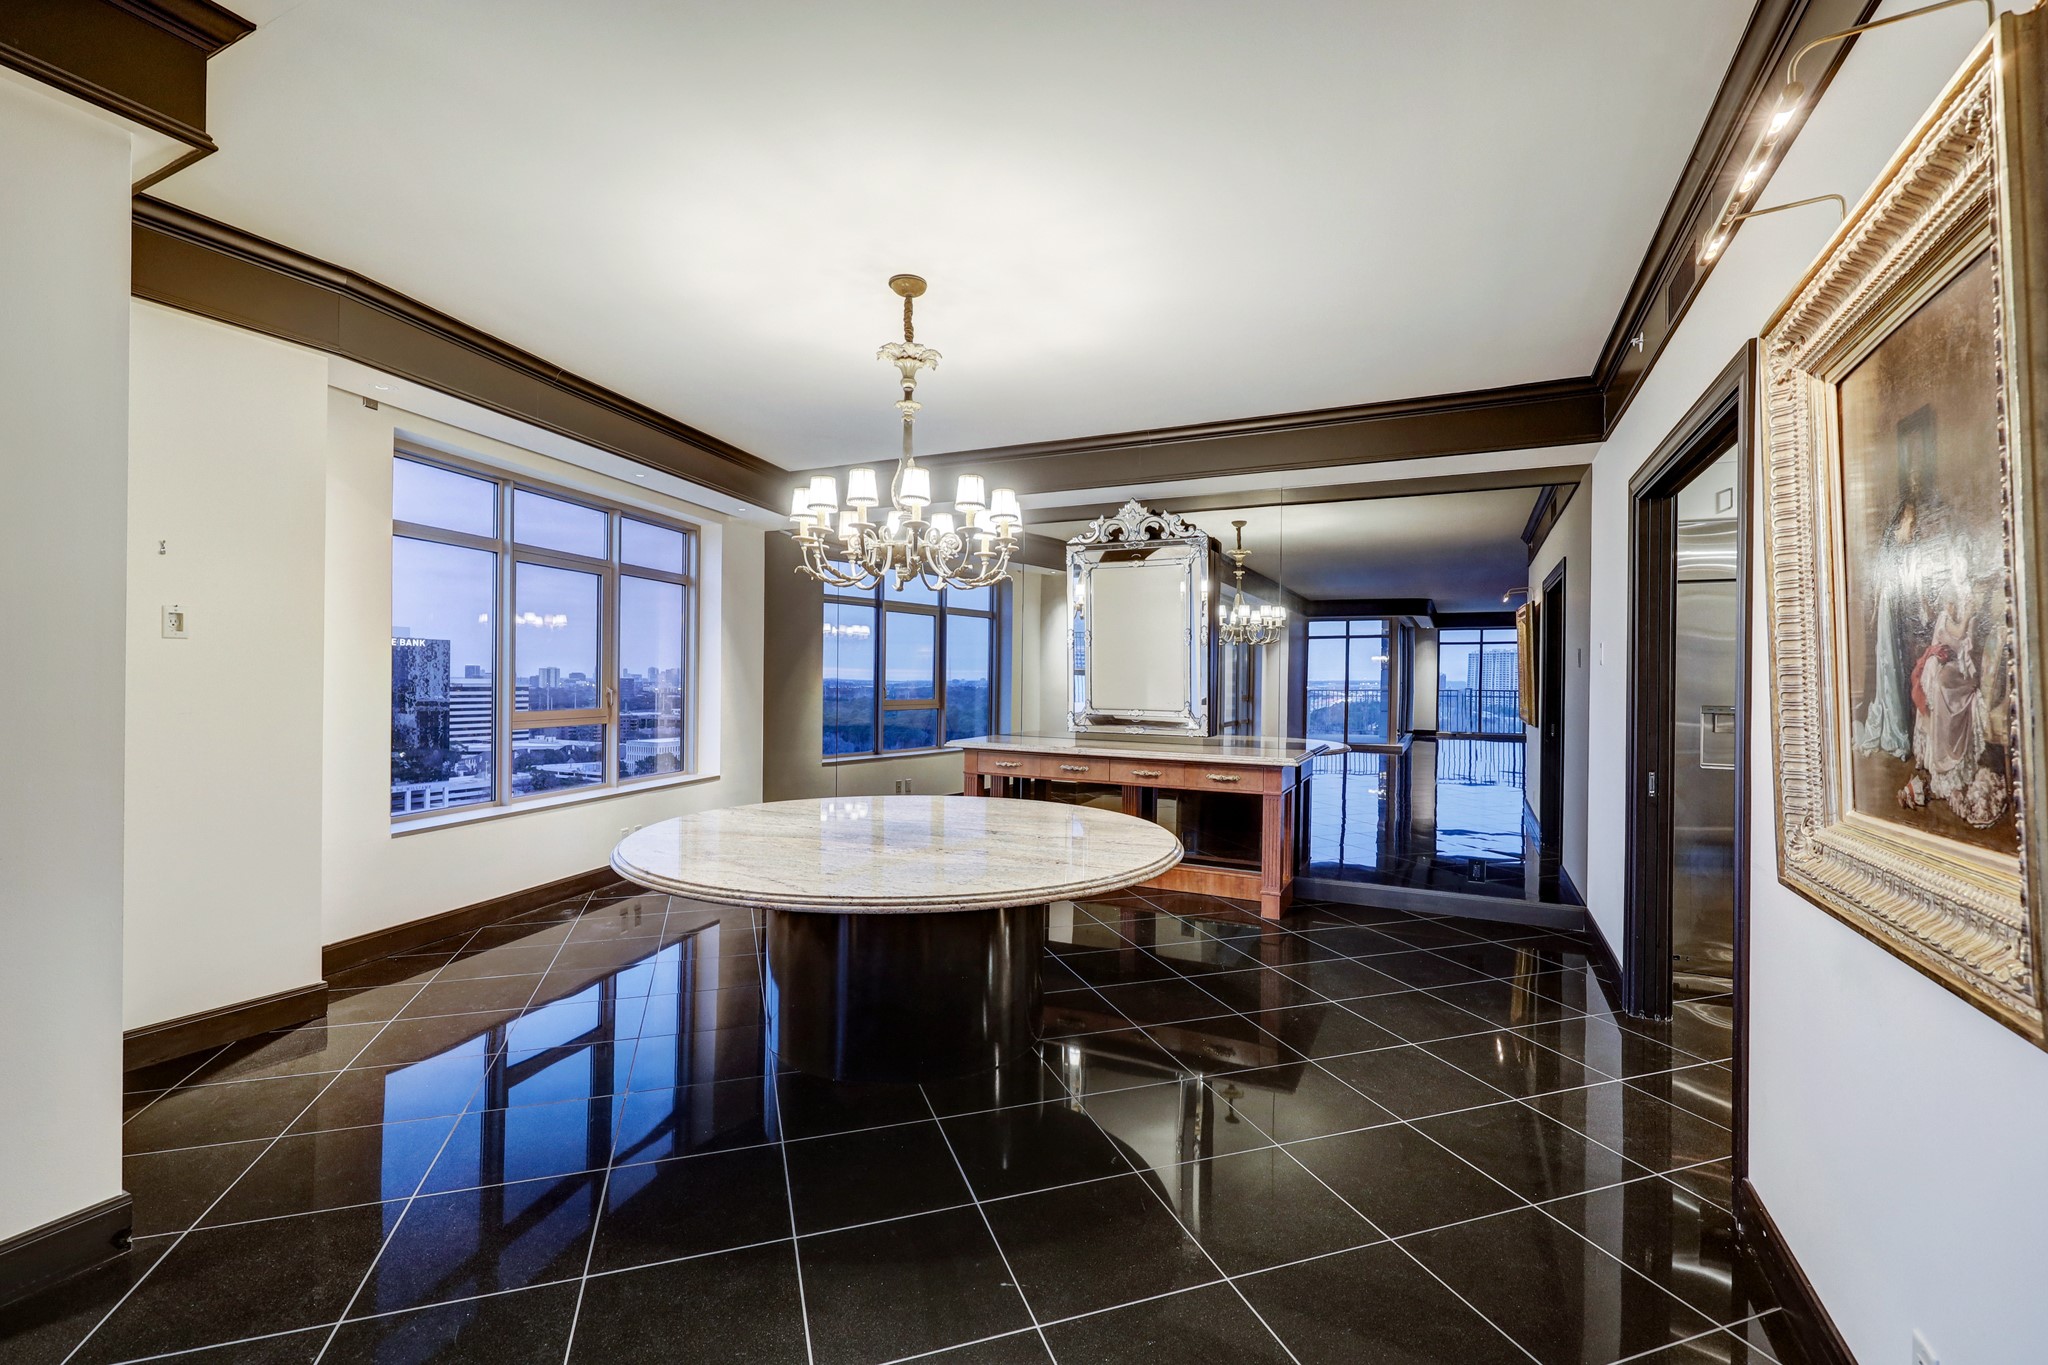 The Formal Dining Room has a mirrored wall, direct access to the Kitchen and is large enough for oversized dining and serving furniture. *Chandelier is excluded, but table and sideboard are available for purchase.